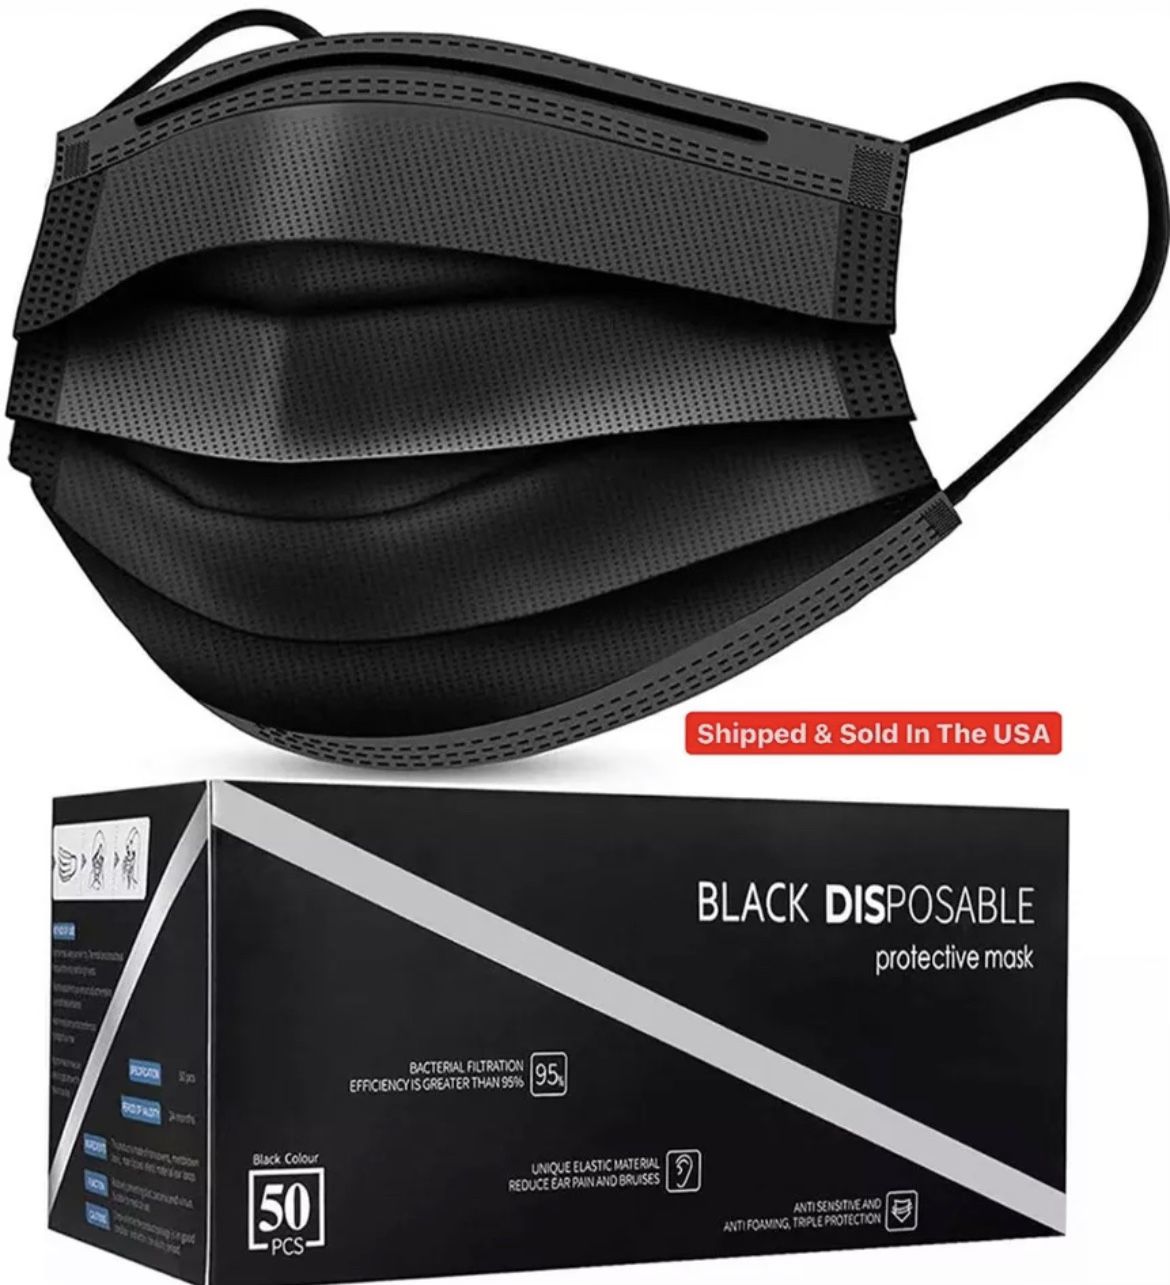 NEW Black Disposable Protective Face Mask 4PLY/3 Layer/50 Count